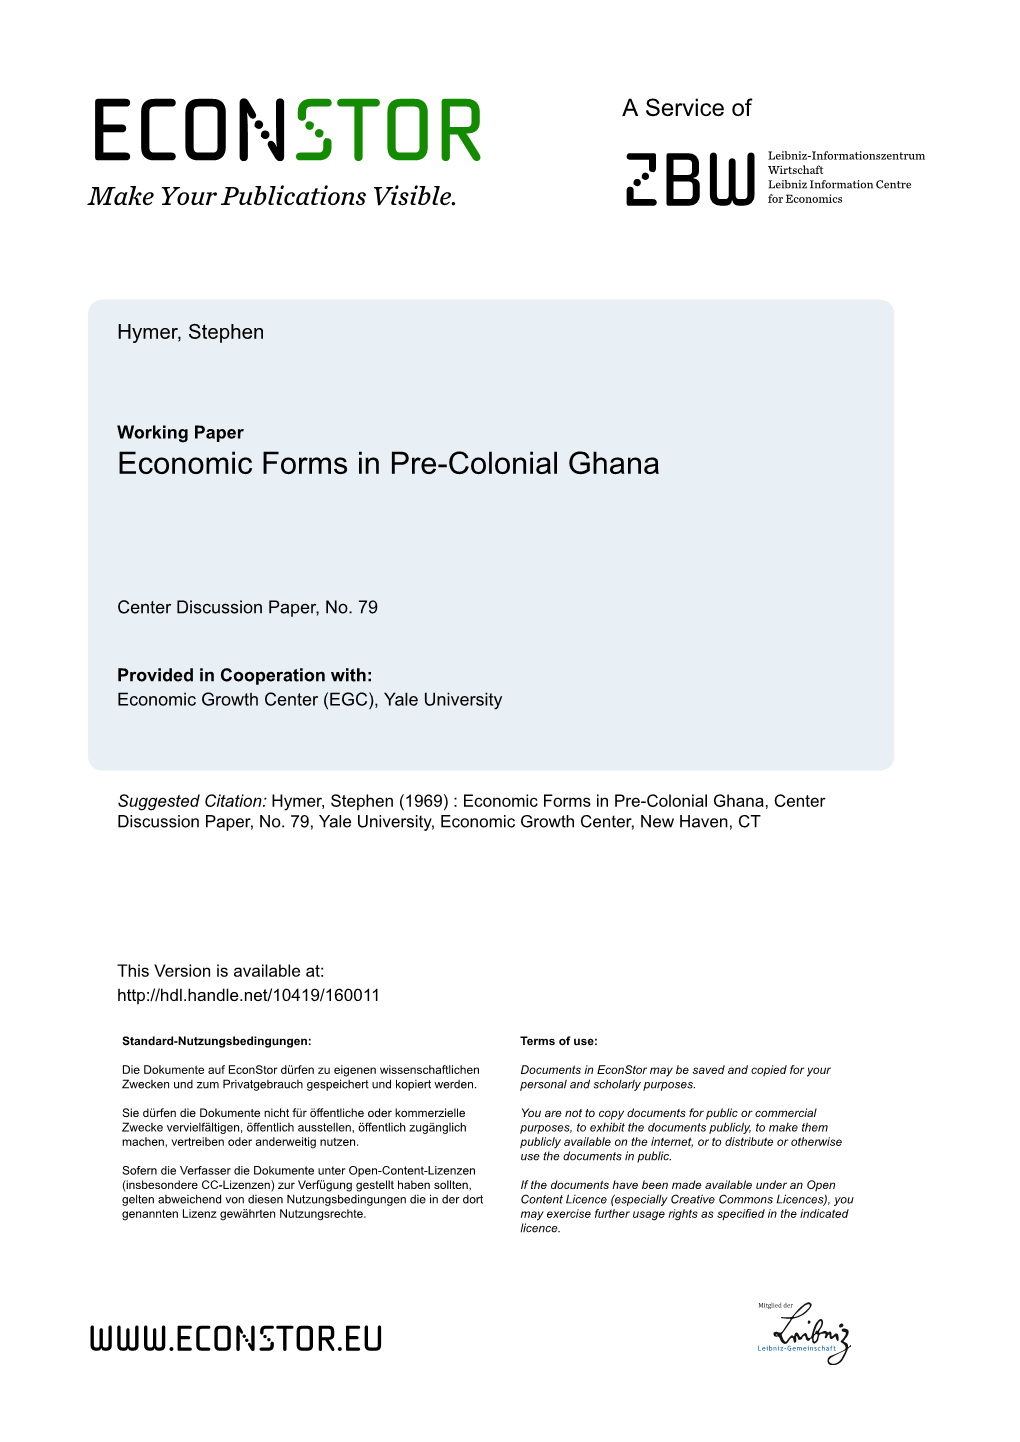 Economic Forms in Pre-Colonial Ghana